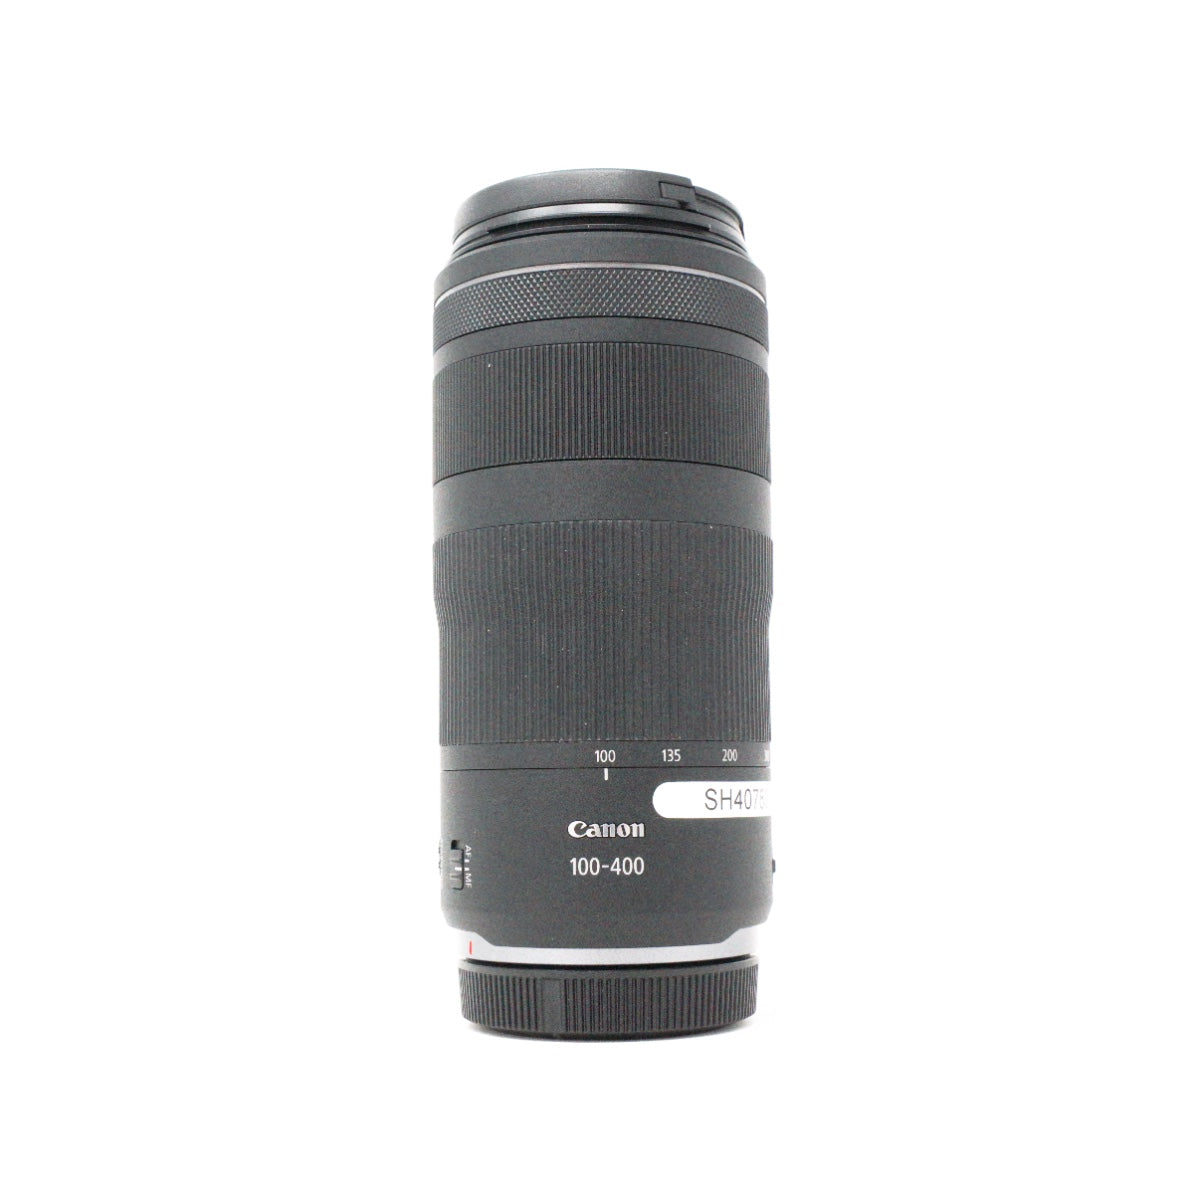 USED Canon RF 100-400mm F5.6-8 IS USM Lens